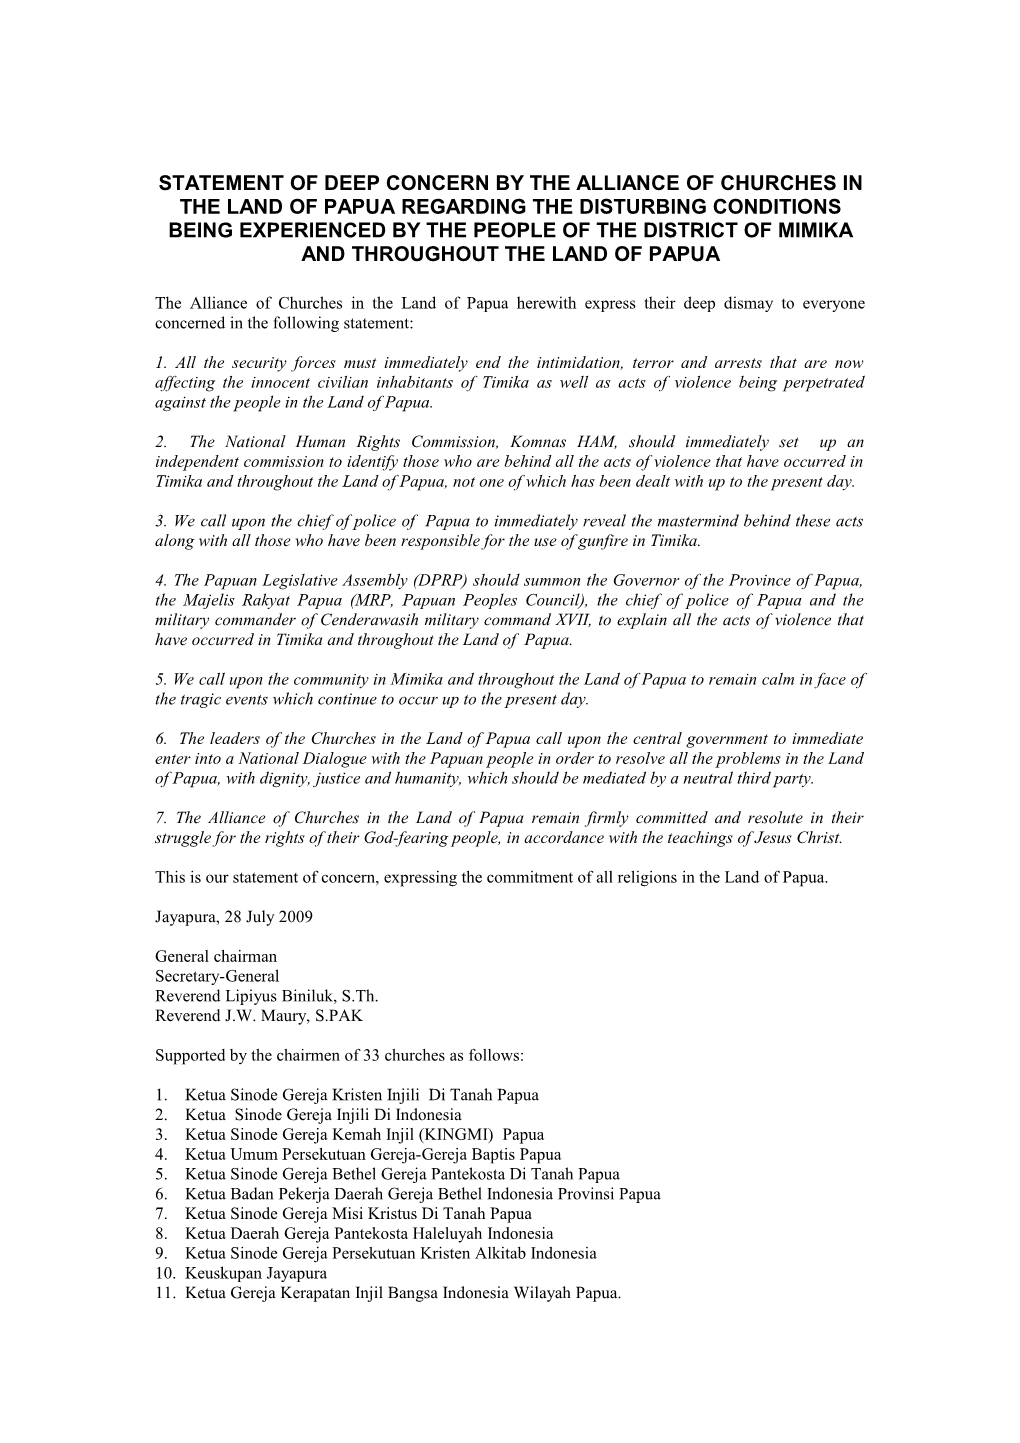 Statement of Deep Concern by the Alliance of Churches in the Land of Papua Regarding The